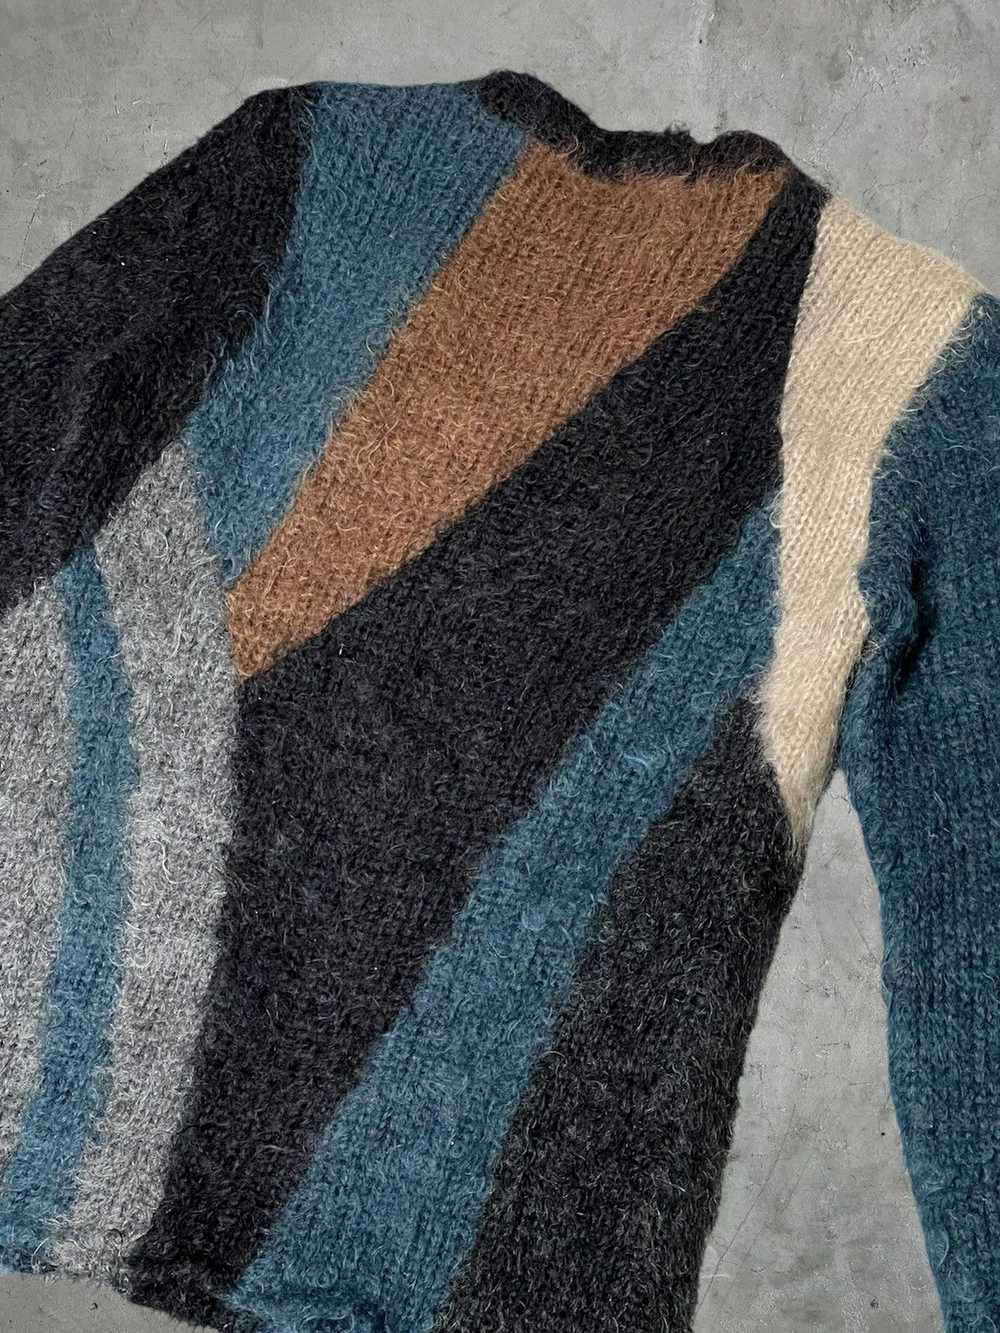 Undercover AW/02 Undercover Mohair Sweater - image 7